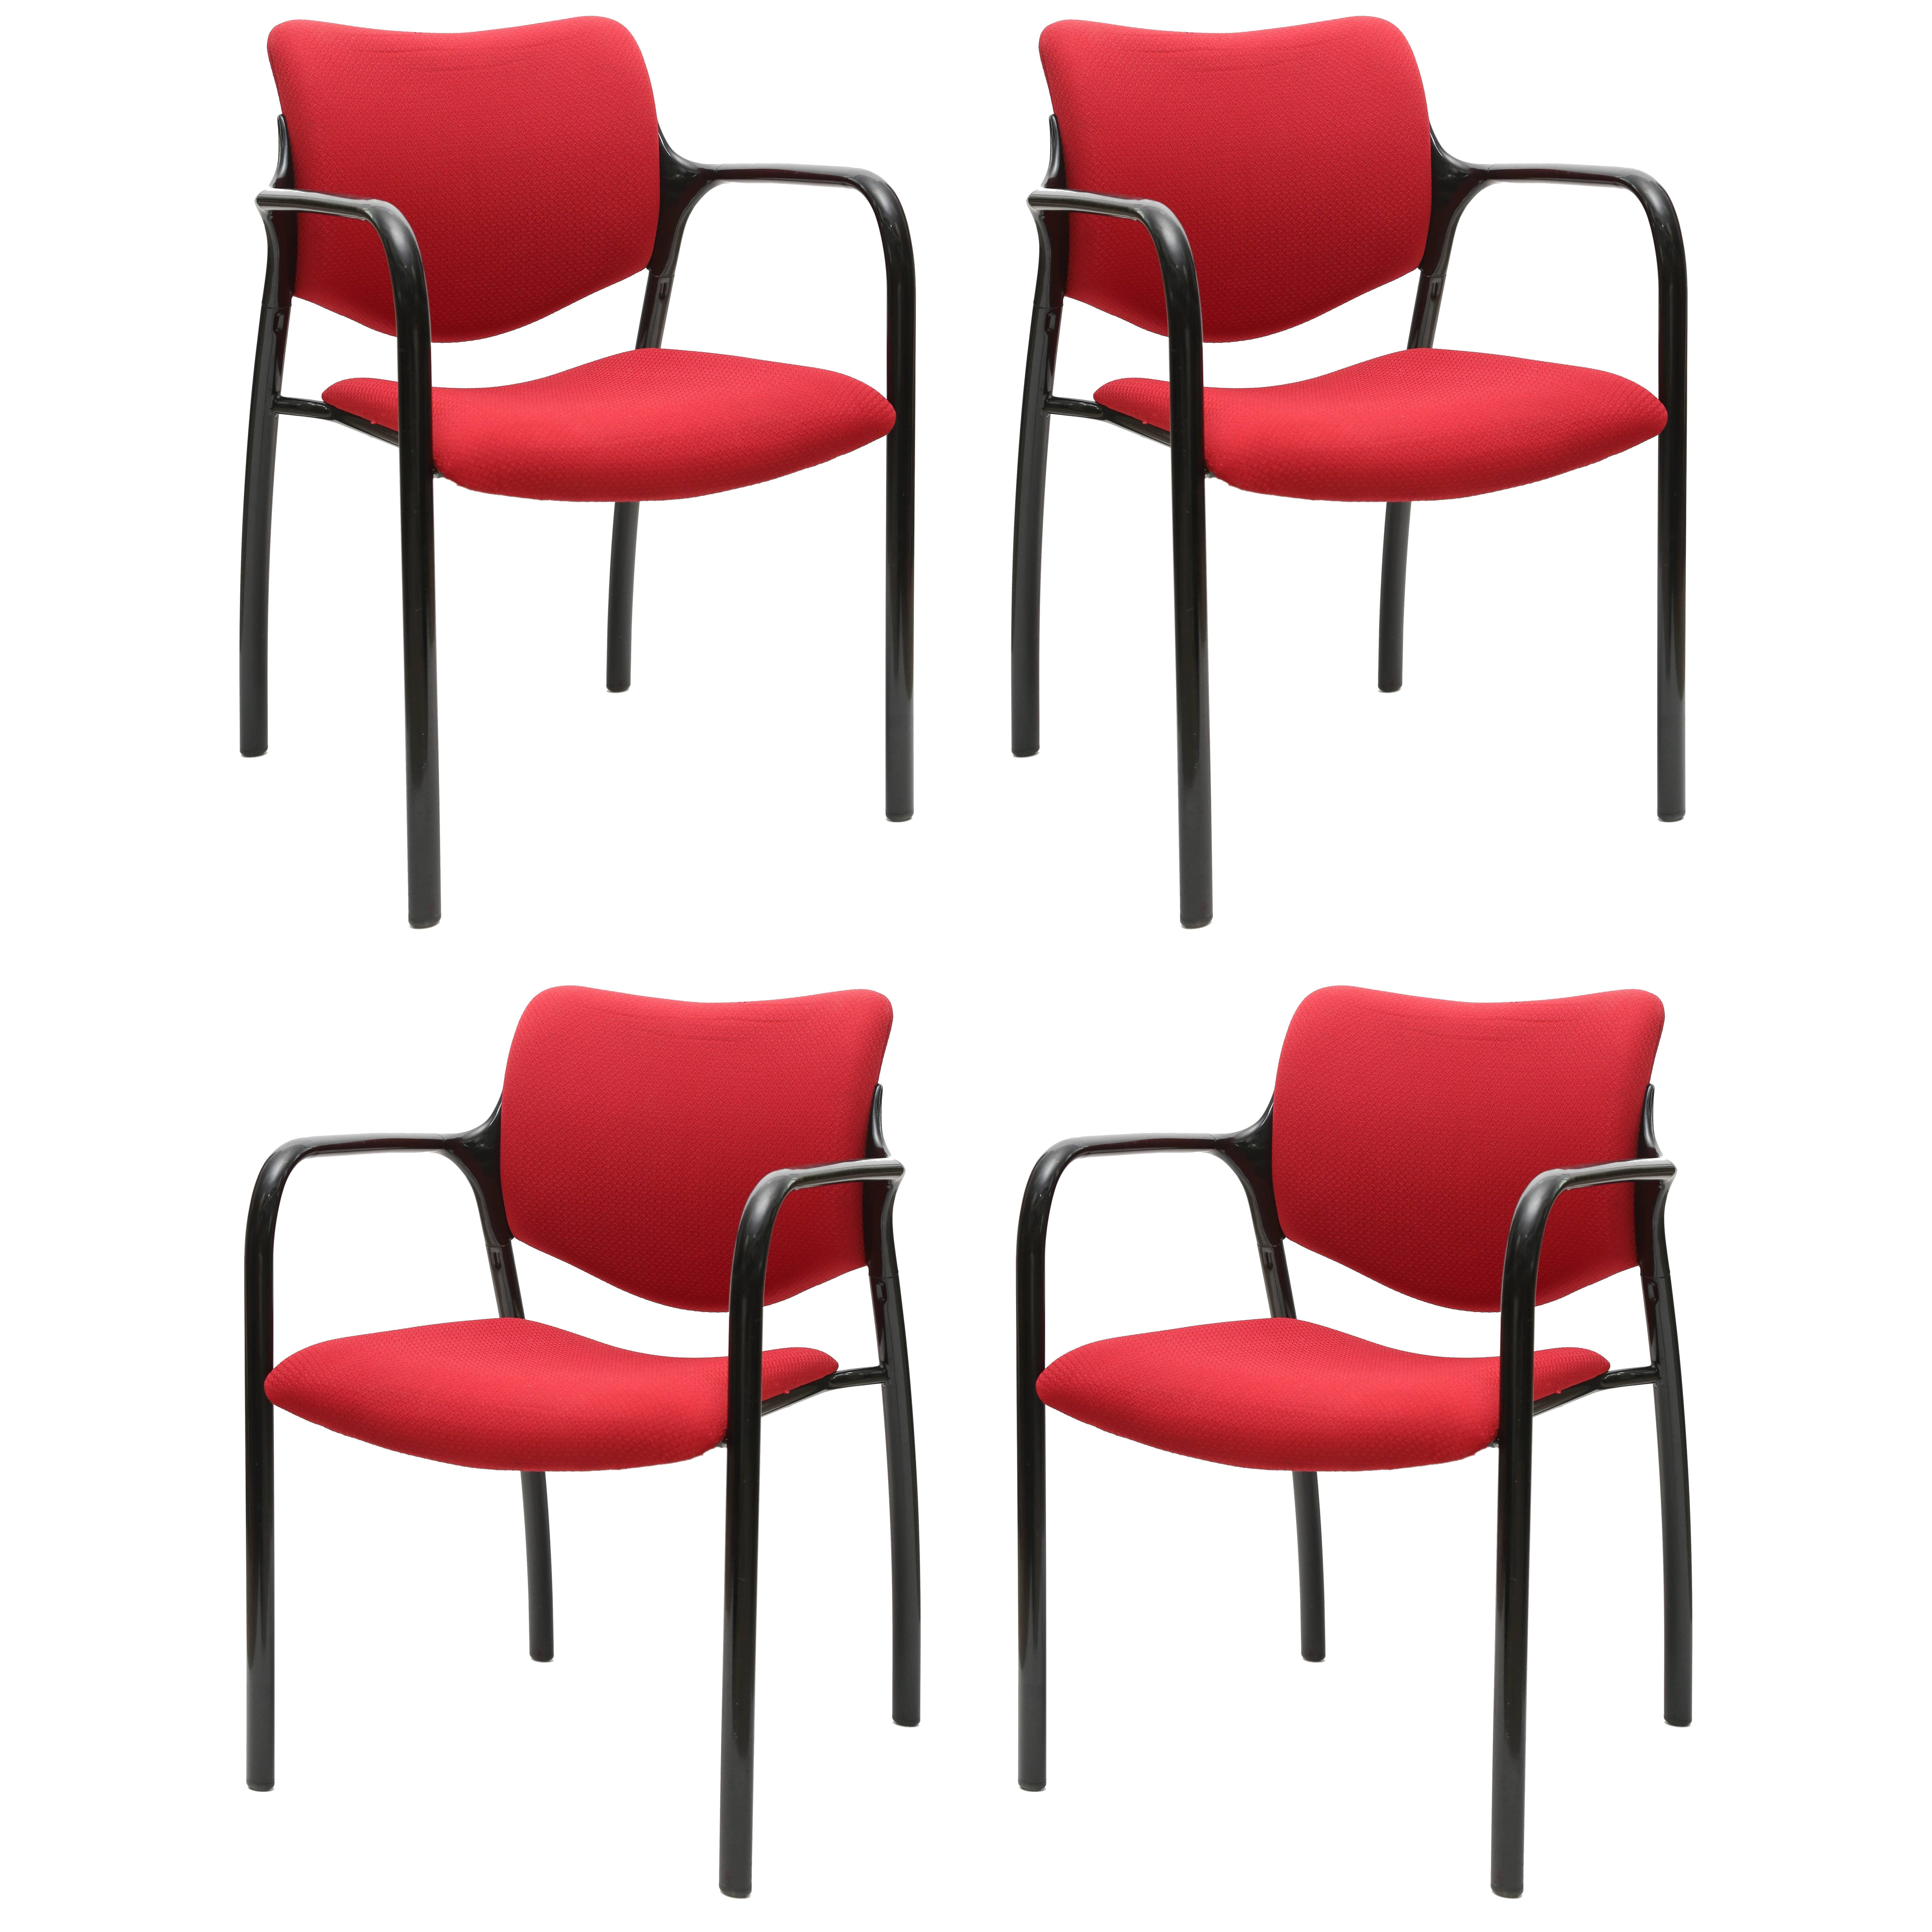 Set of Four Herman Miller Mod Chairs, 1960s, USA For Sale